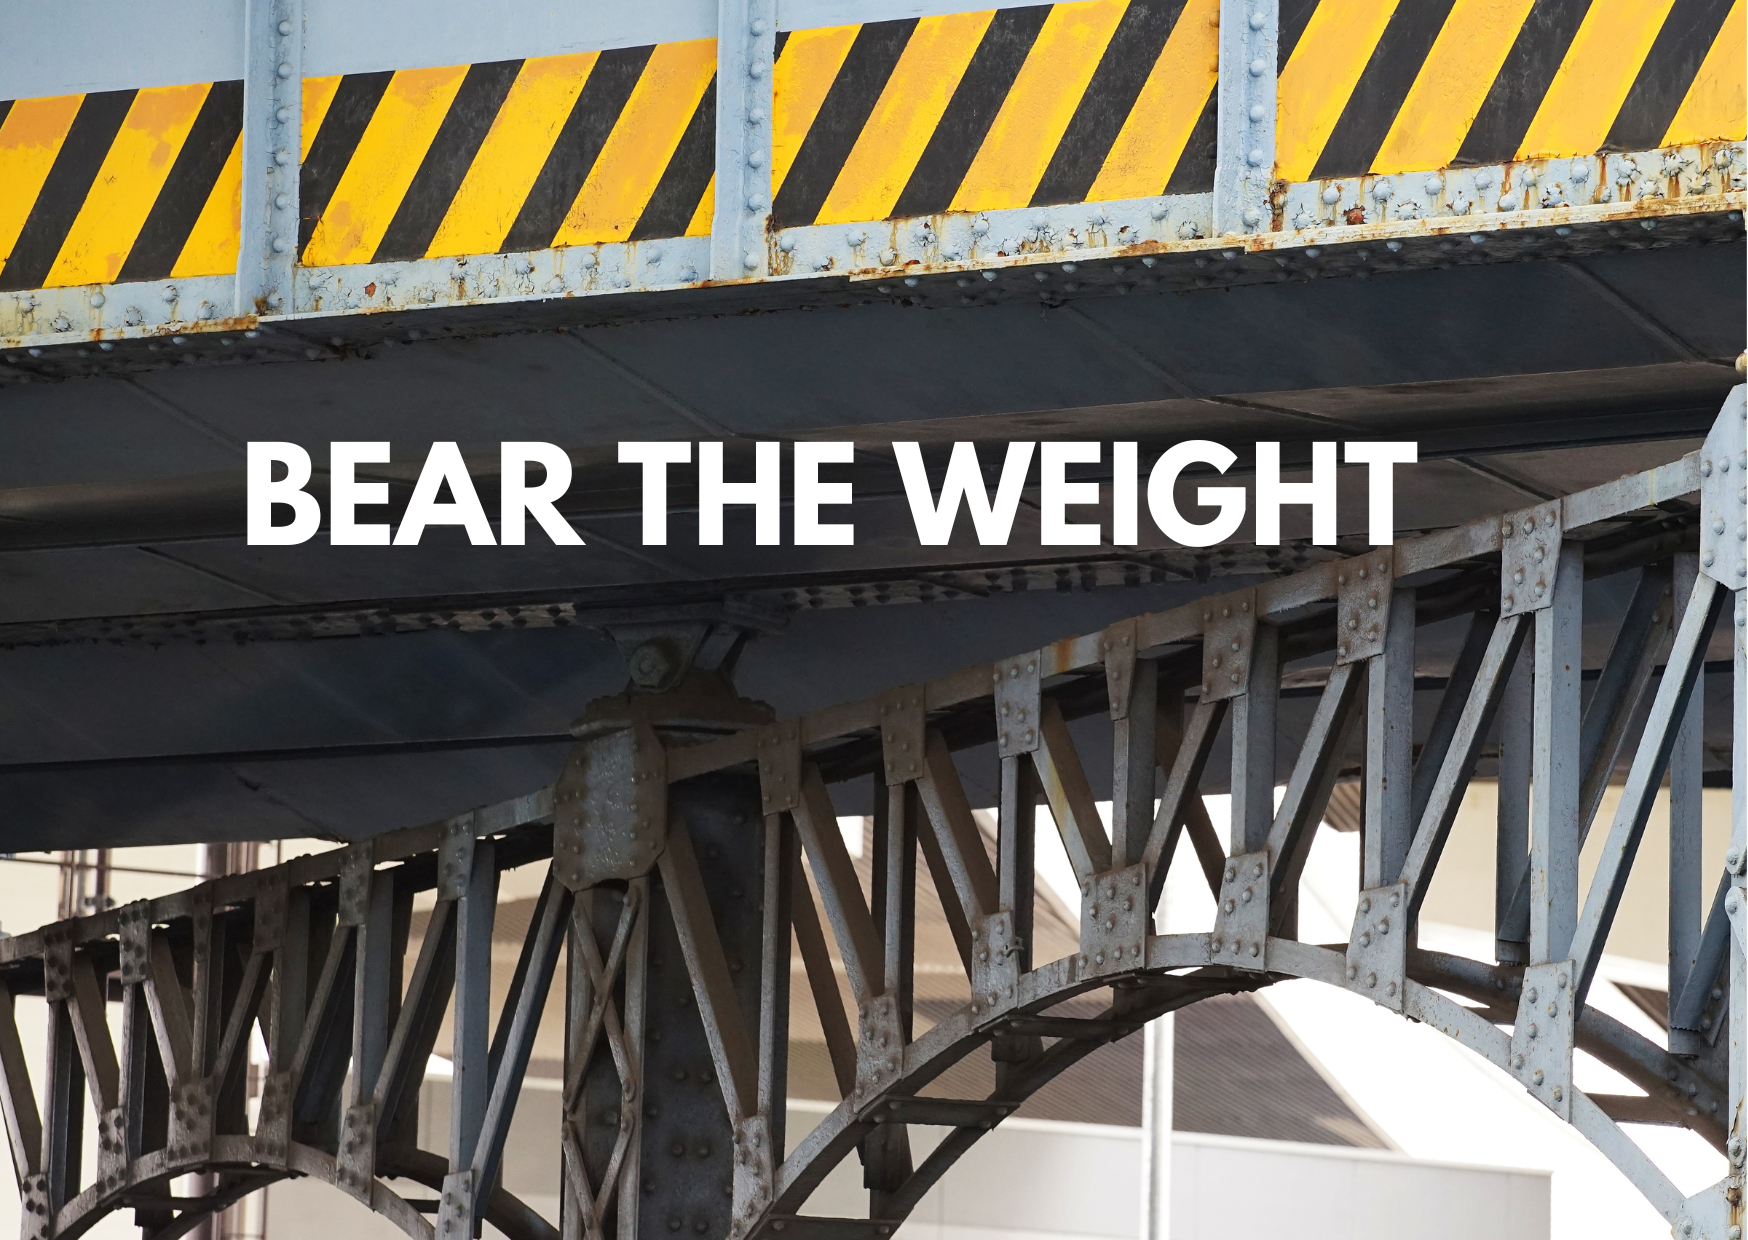 A picture showing support beams of a metal bridge with the caption "Bear The Weight"